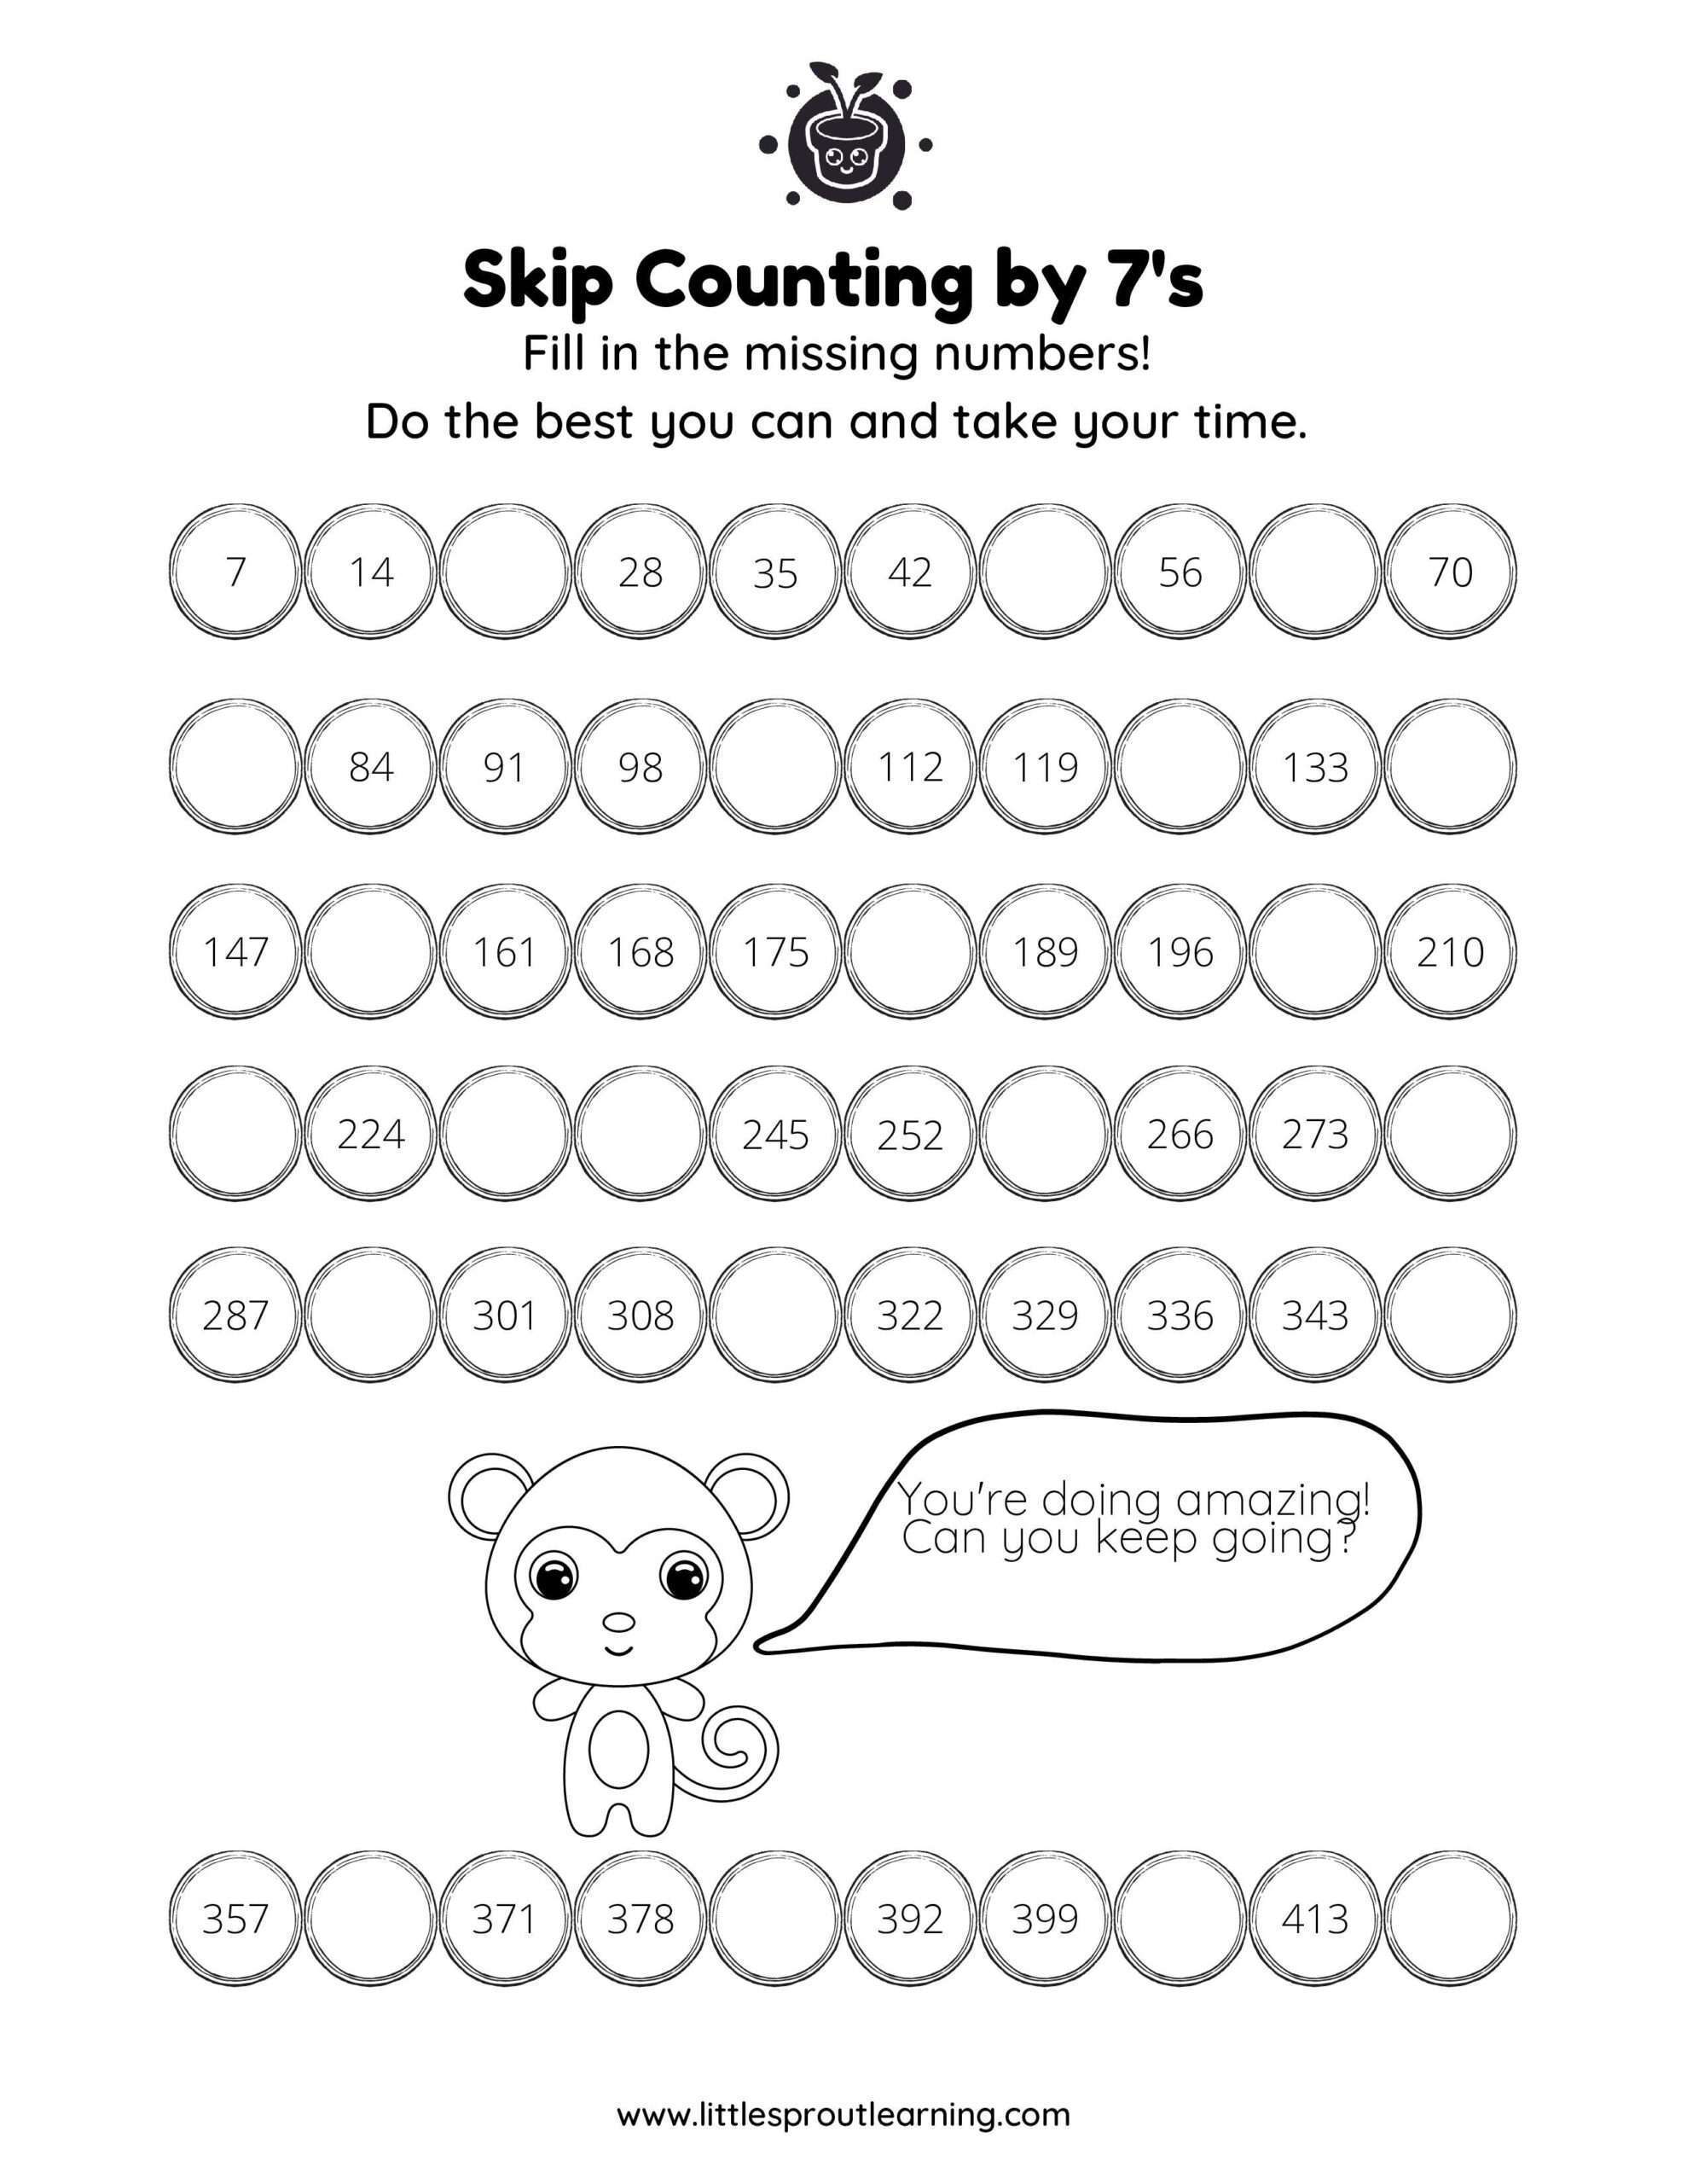 Skip Counting by 7’s